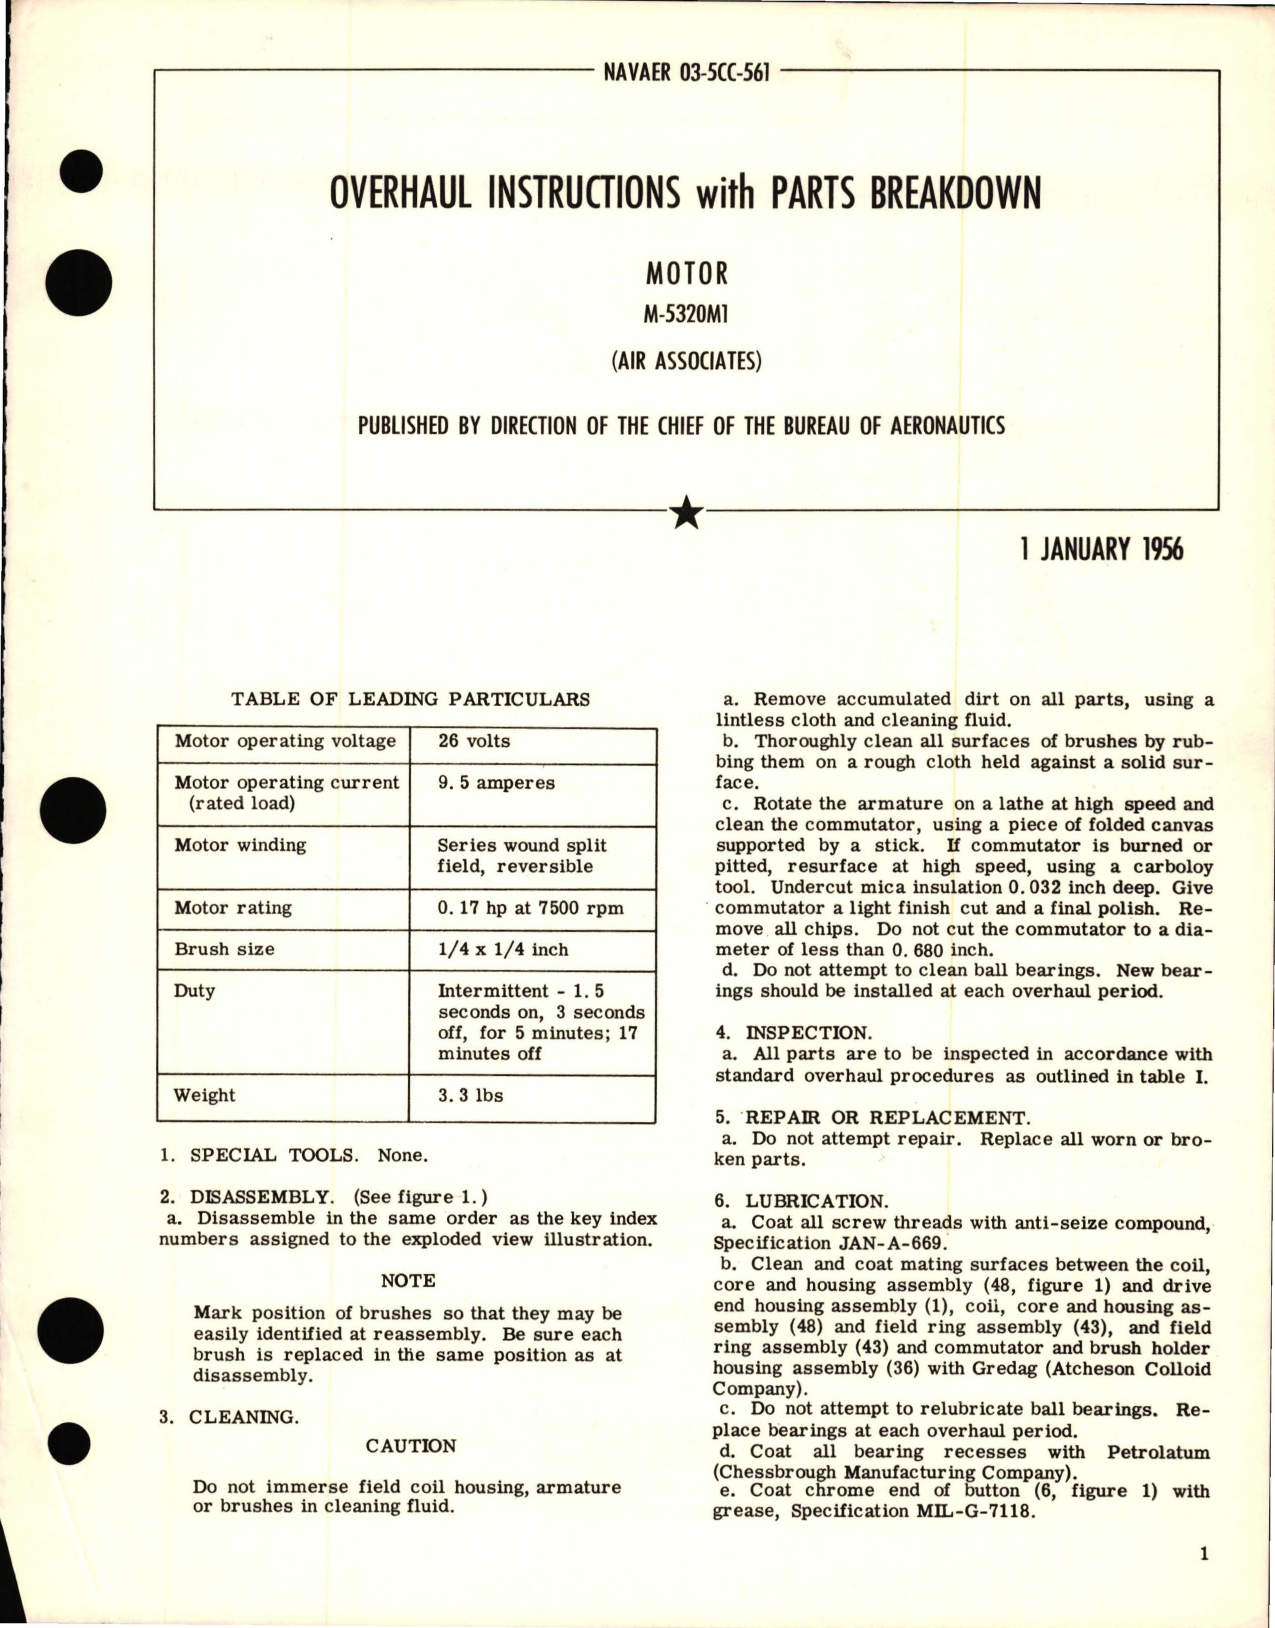 Sample page 1 from AirCorps Library document: Overhaul Instructions with Parts Breakdown for Motor M-5320M1